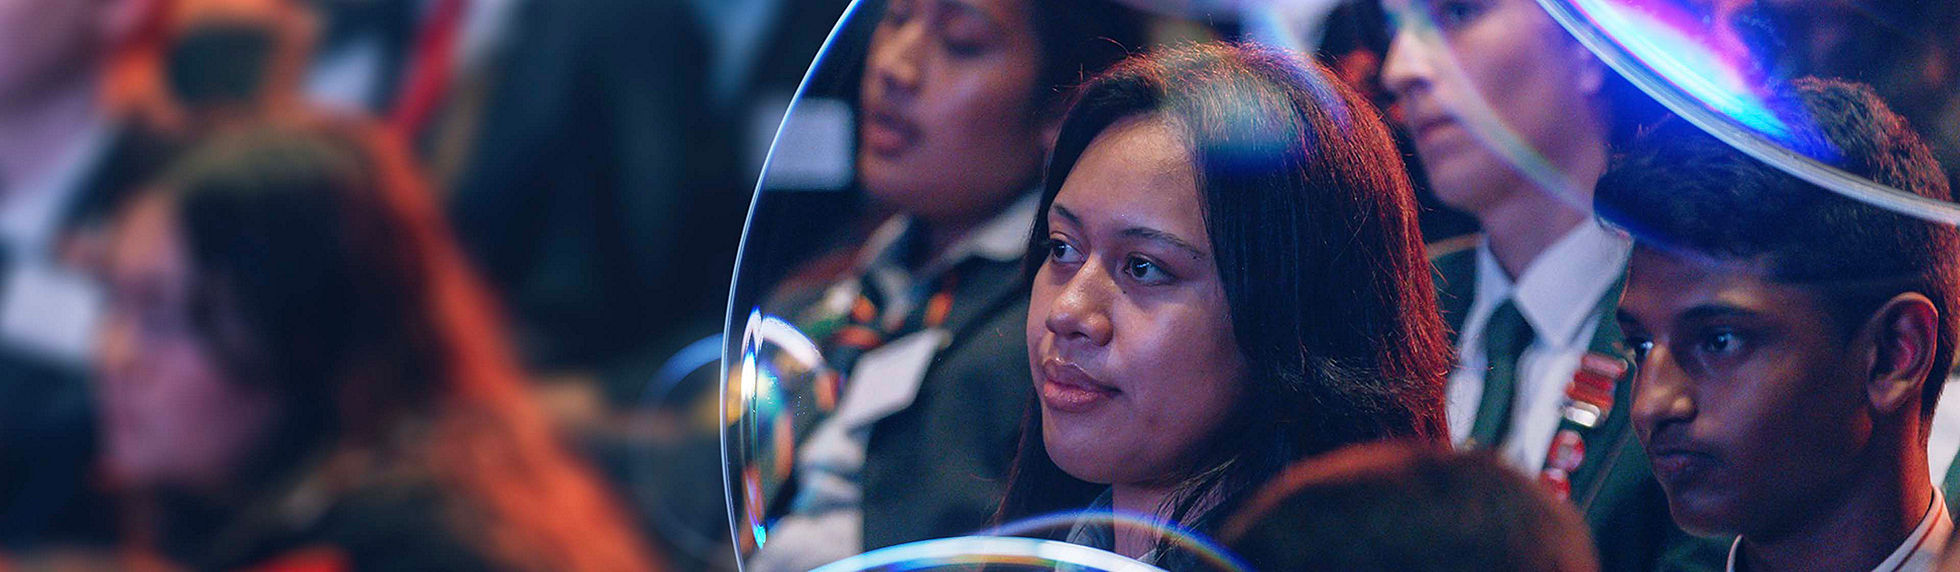 A young woman in a crowd viewed through the Datacom lens